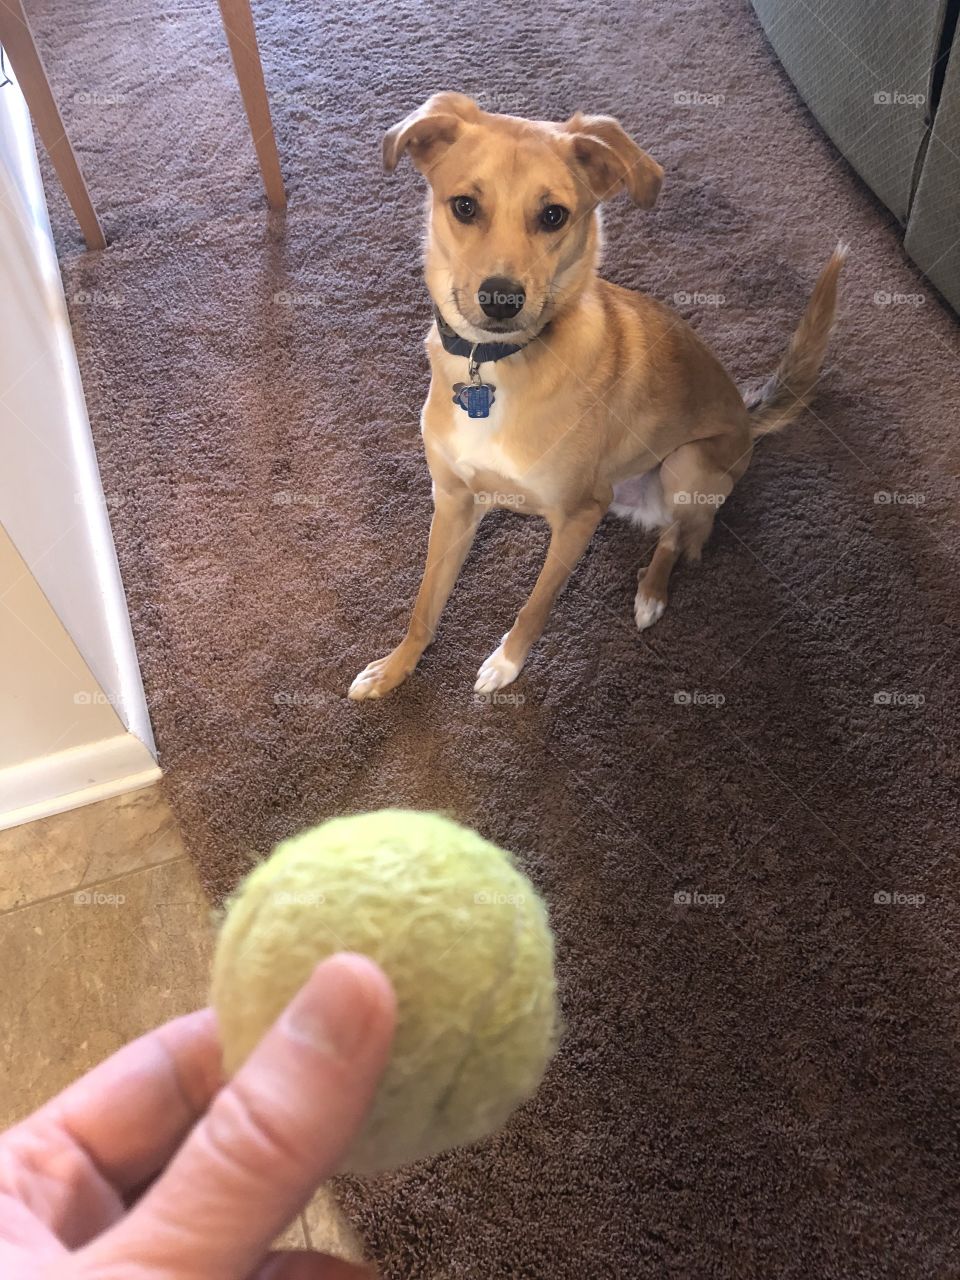 Dog waiting patiently for his ball